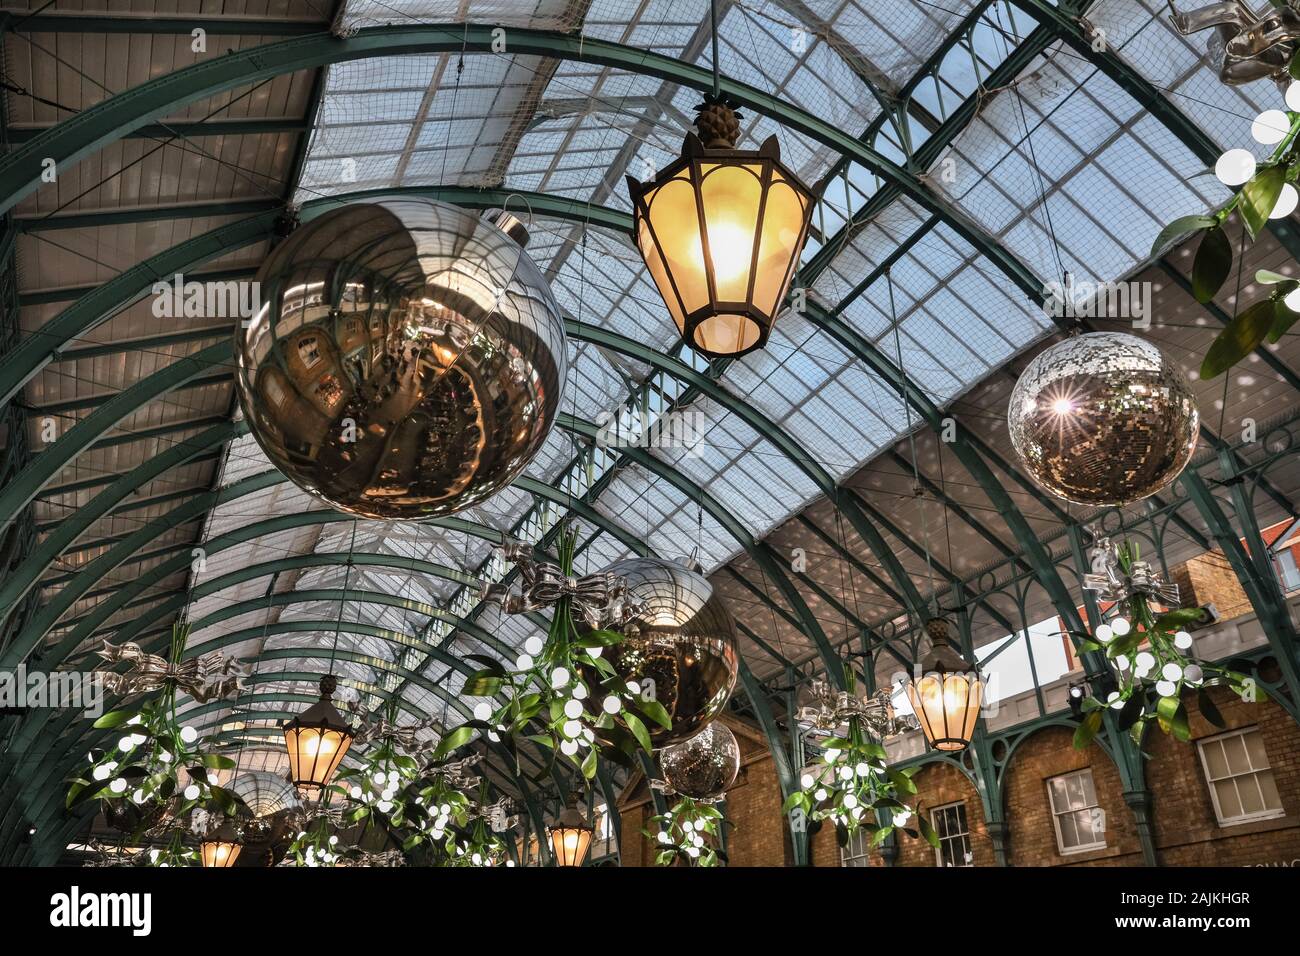 Covent Garden Market Christmas Decorations, decorative baubles, holly  and decor in roof structure, London Stock Photo